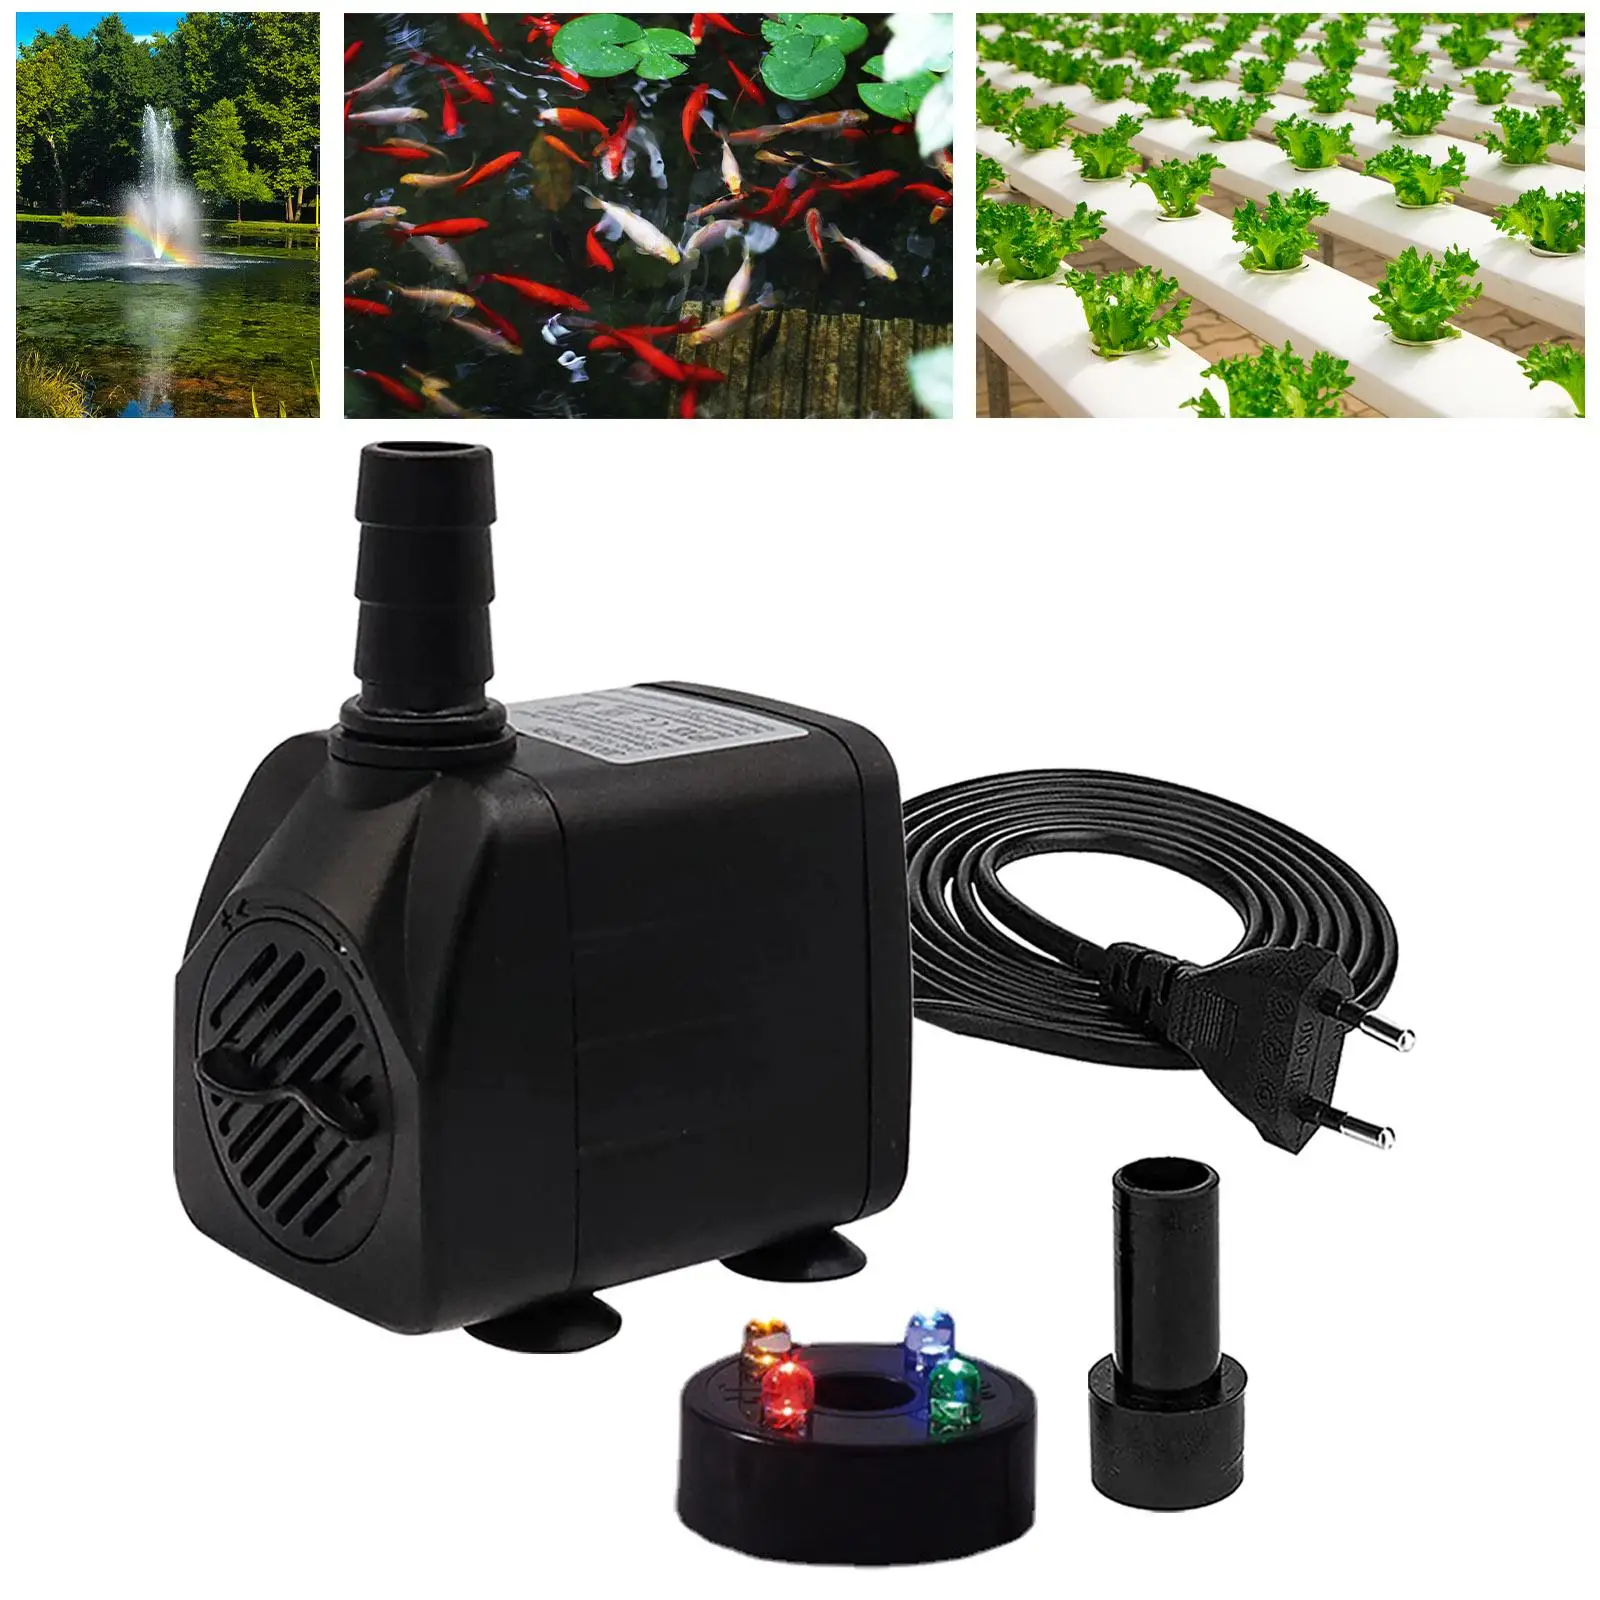 Mini Submersible Pump Adjustable with 1.5 M Power Cable 2 Nozzles Quiet Aquarium Water Pump for Waterfall Water Feature Pond